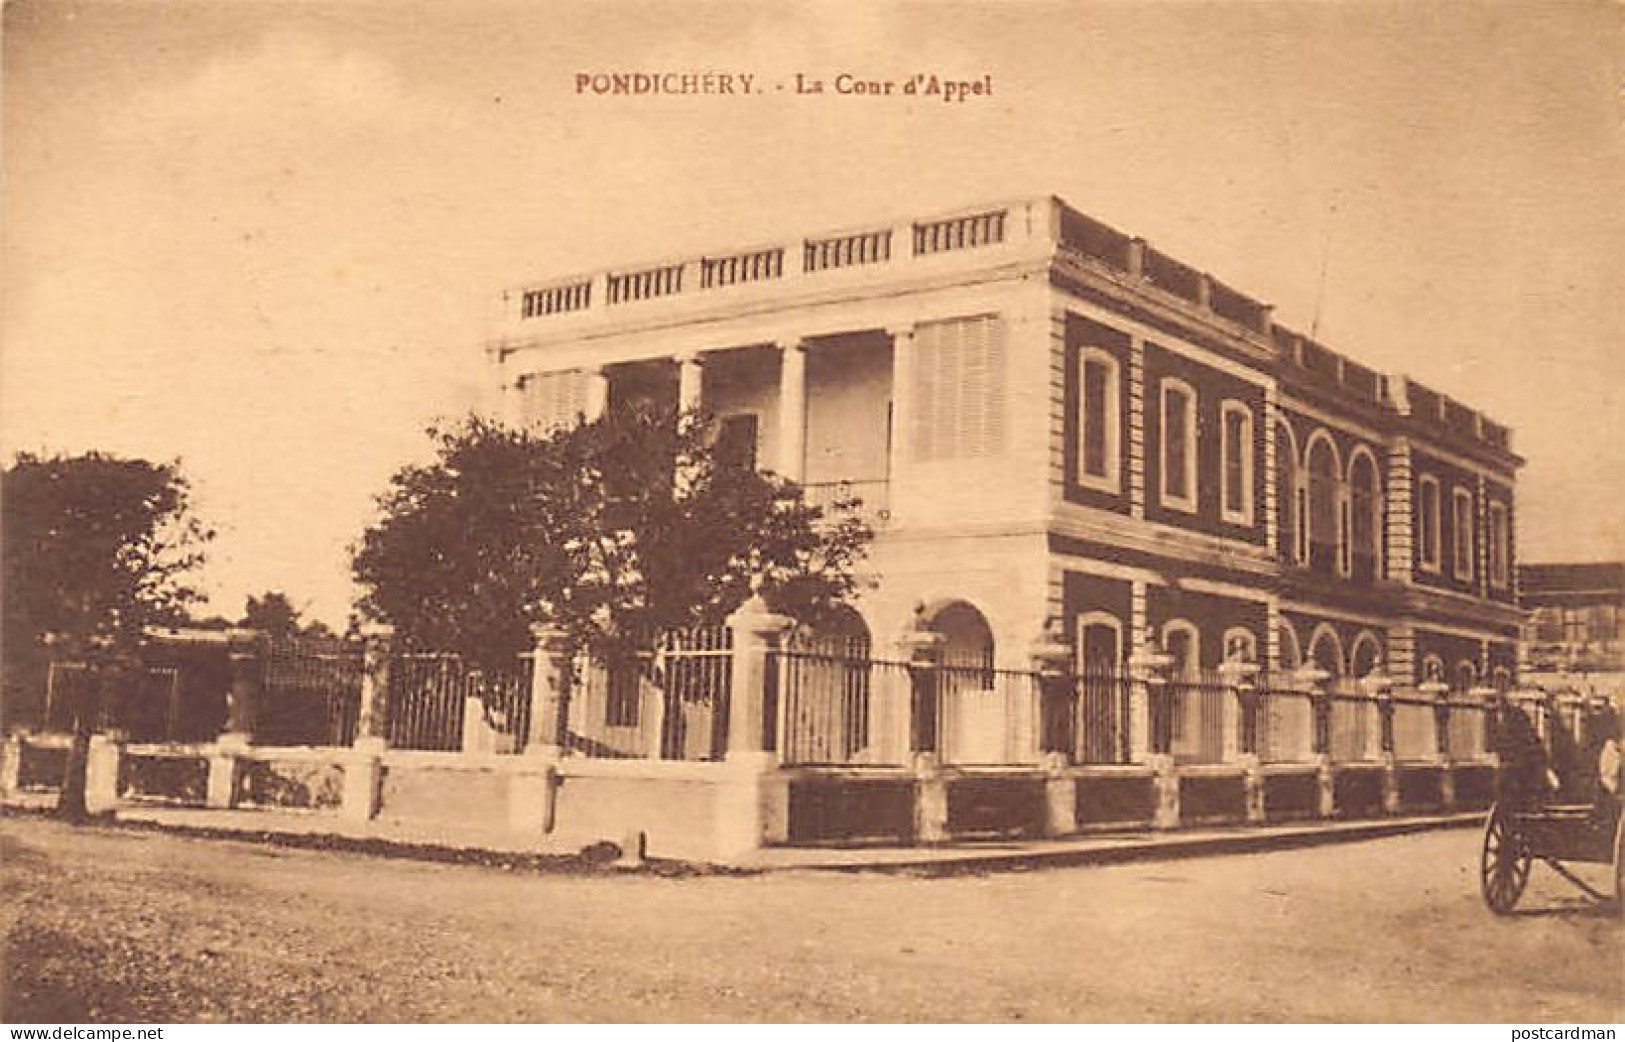 India - PUDUCHERRY Pondichéry - The Court Of Appeal - Publ. Unknown - Inde